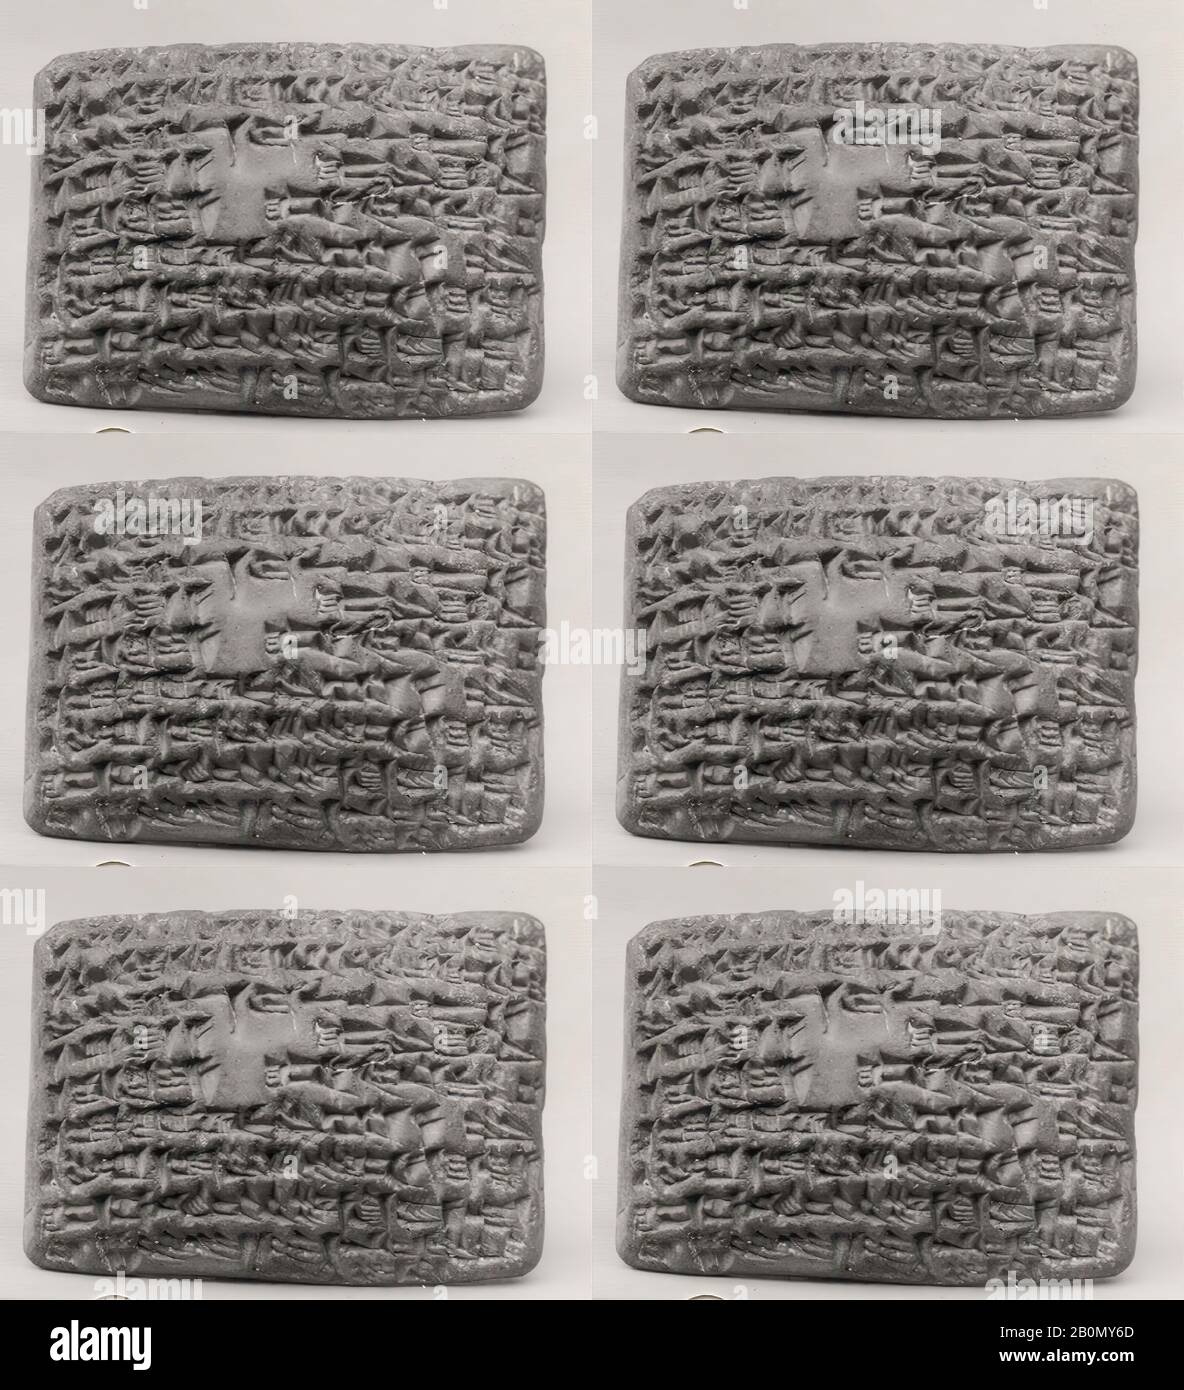 Cuneiform tablet: quittance, Egibi archive, Babylonian, Neo-Babylonian, Date ca. 558 BC, Mesopotamia, Babylon (modern Hillah), Babylonian, Clay, 4.1 x 5.7 x 2.2 cm (1 5/8 x 2 1/4 x 7/8 in.), Clay-Tablets-Inscribed Stock Photo